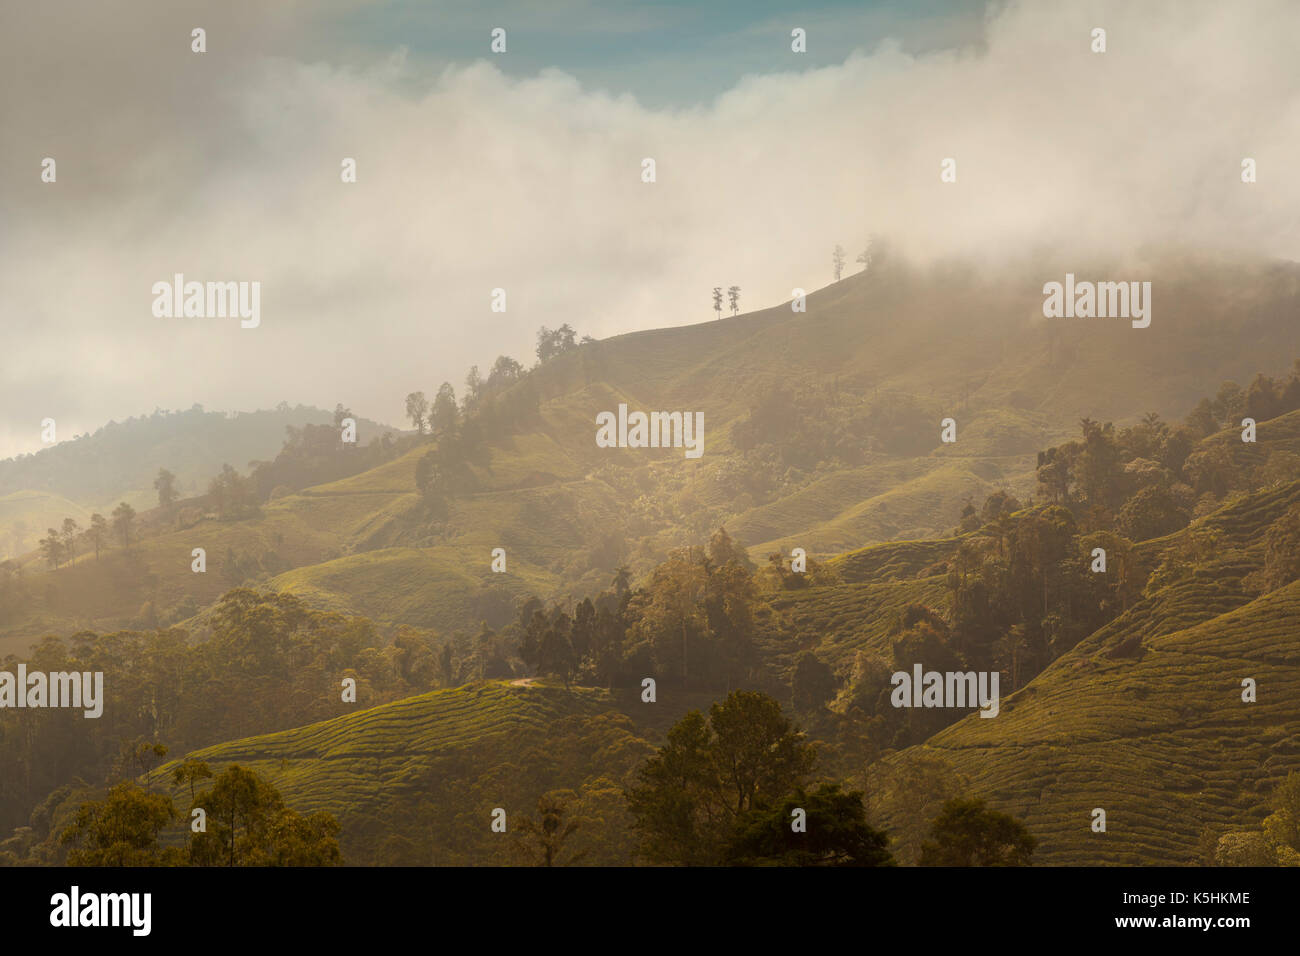 Cameron Highlands, Malaysia, misty hills with evening sunlight breaking through Stock Photo